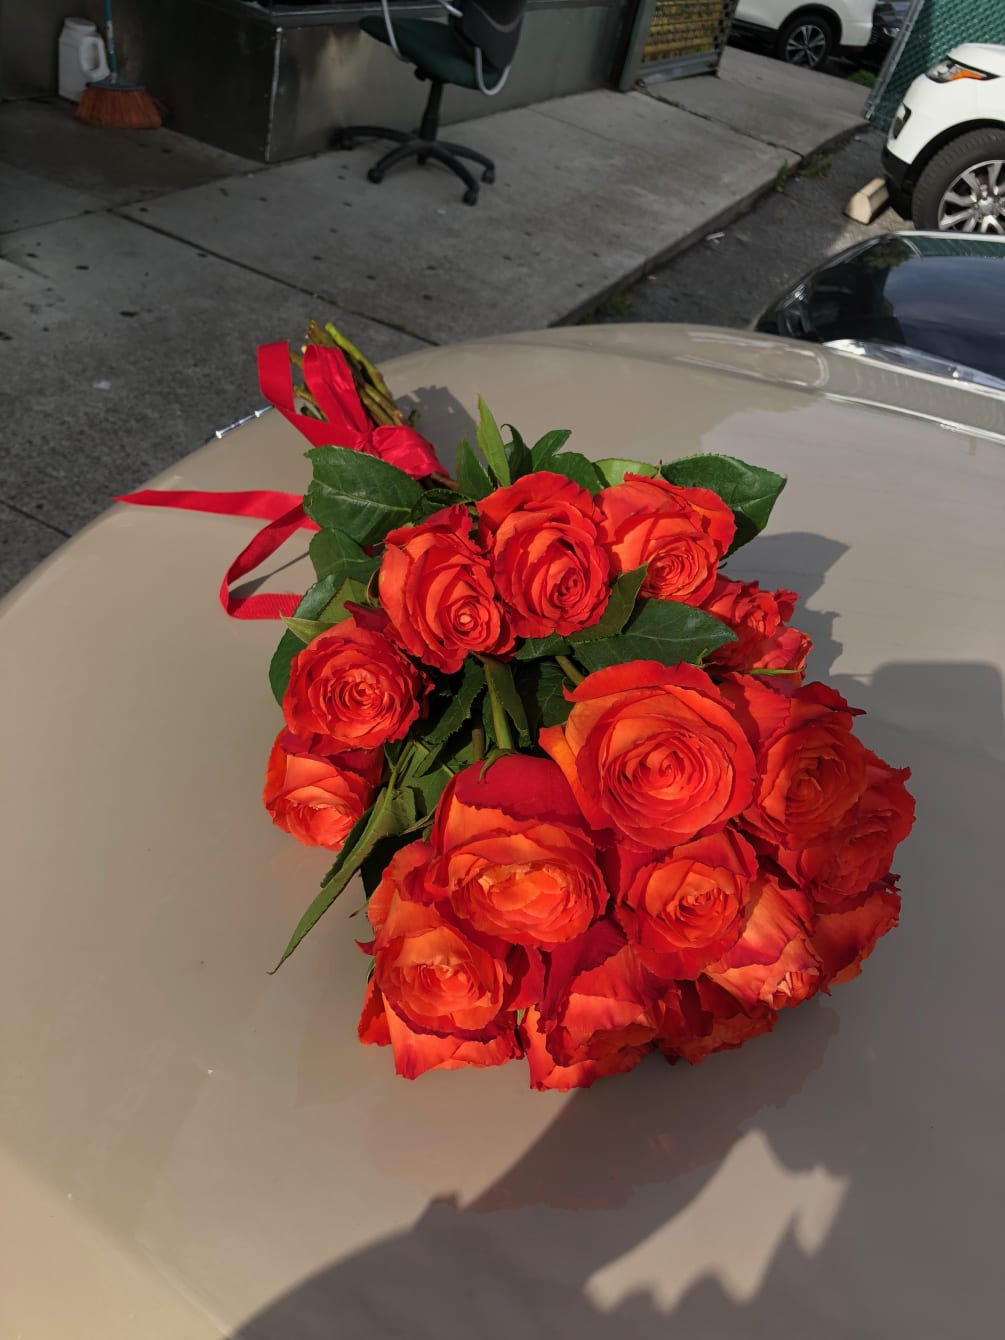 This bouquet has 17 stems of deep orange roses .hand bouquet as